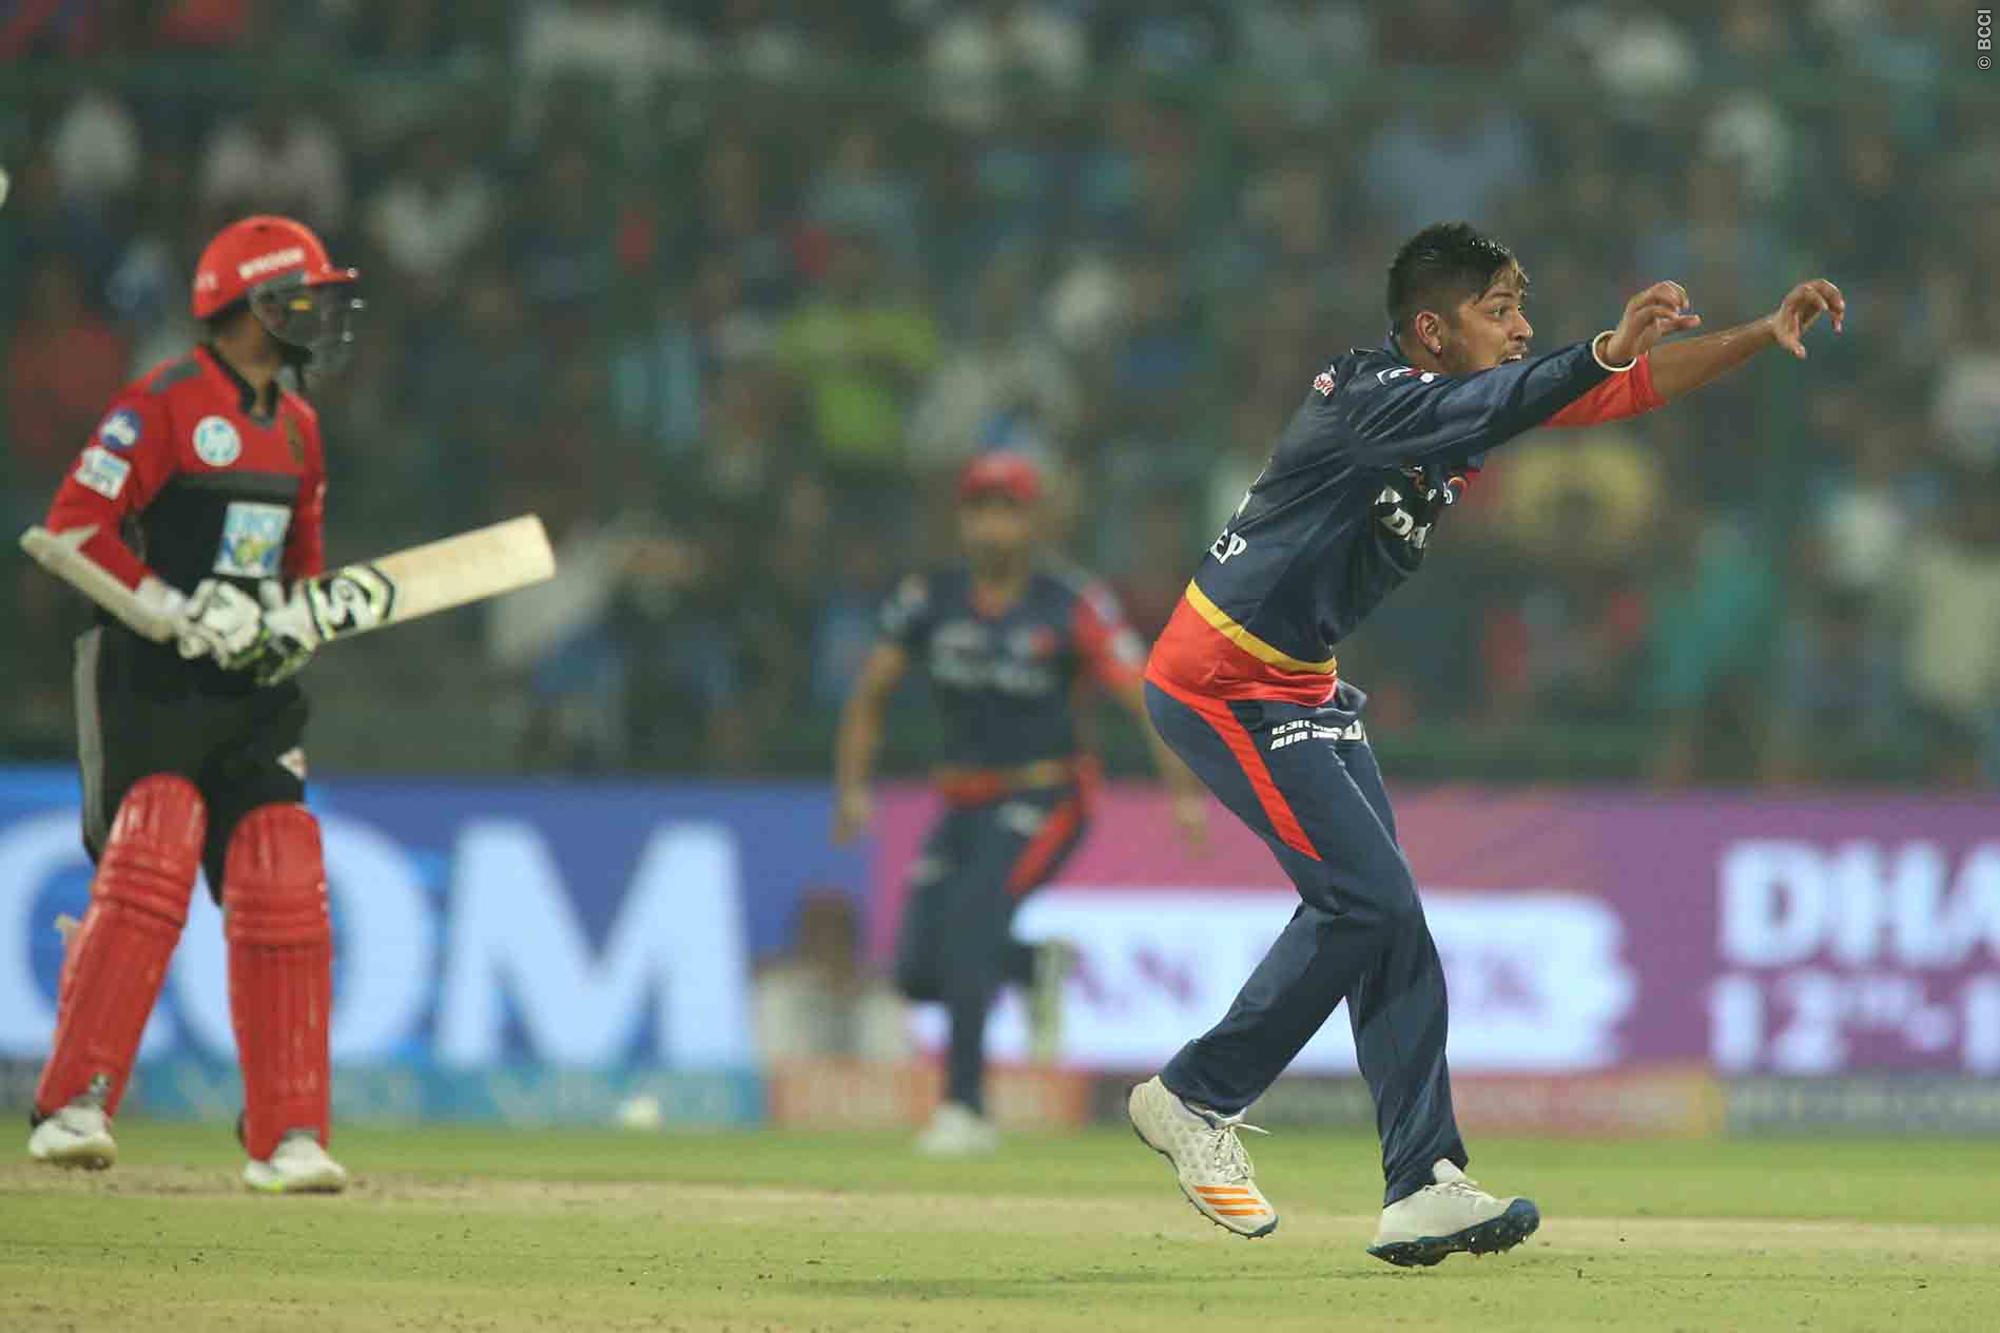 Sandeep Lamichhane tests positive for COVID-19